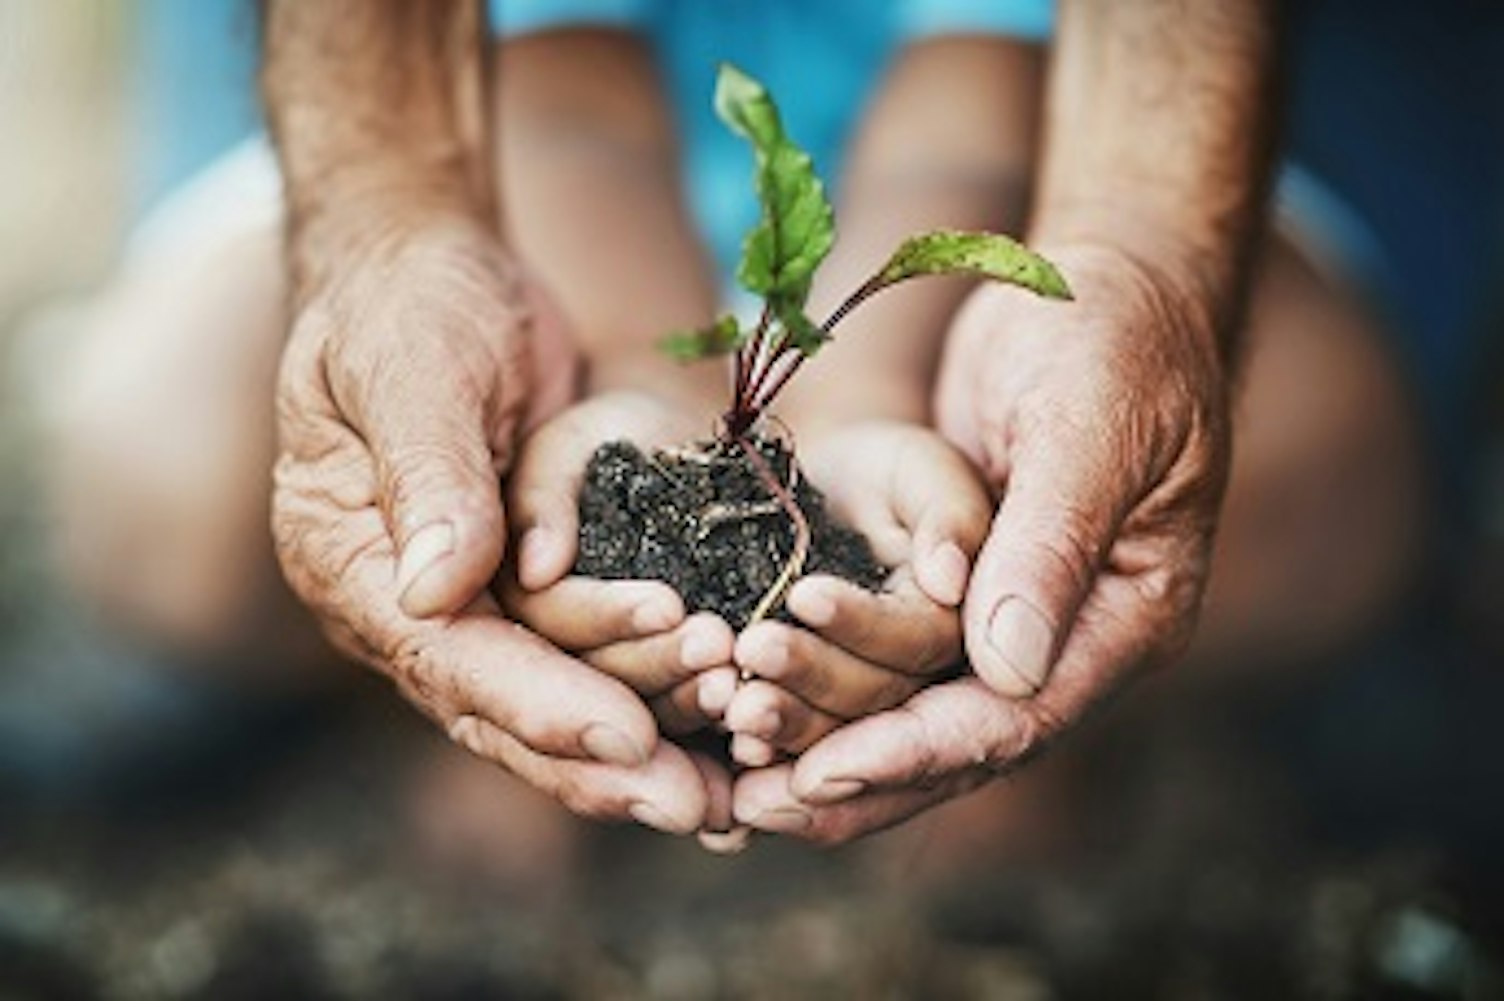 orig closeup shot of an adult and child holding a plant growing out of soil_344px